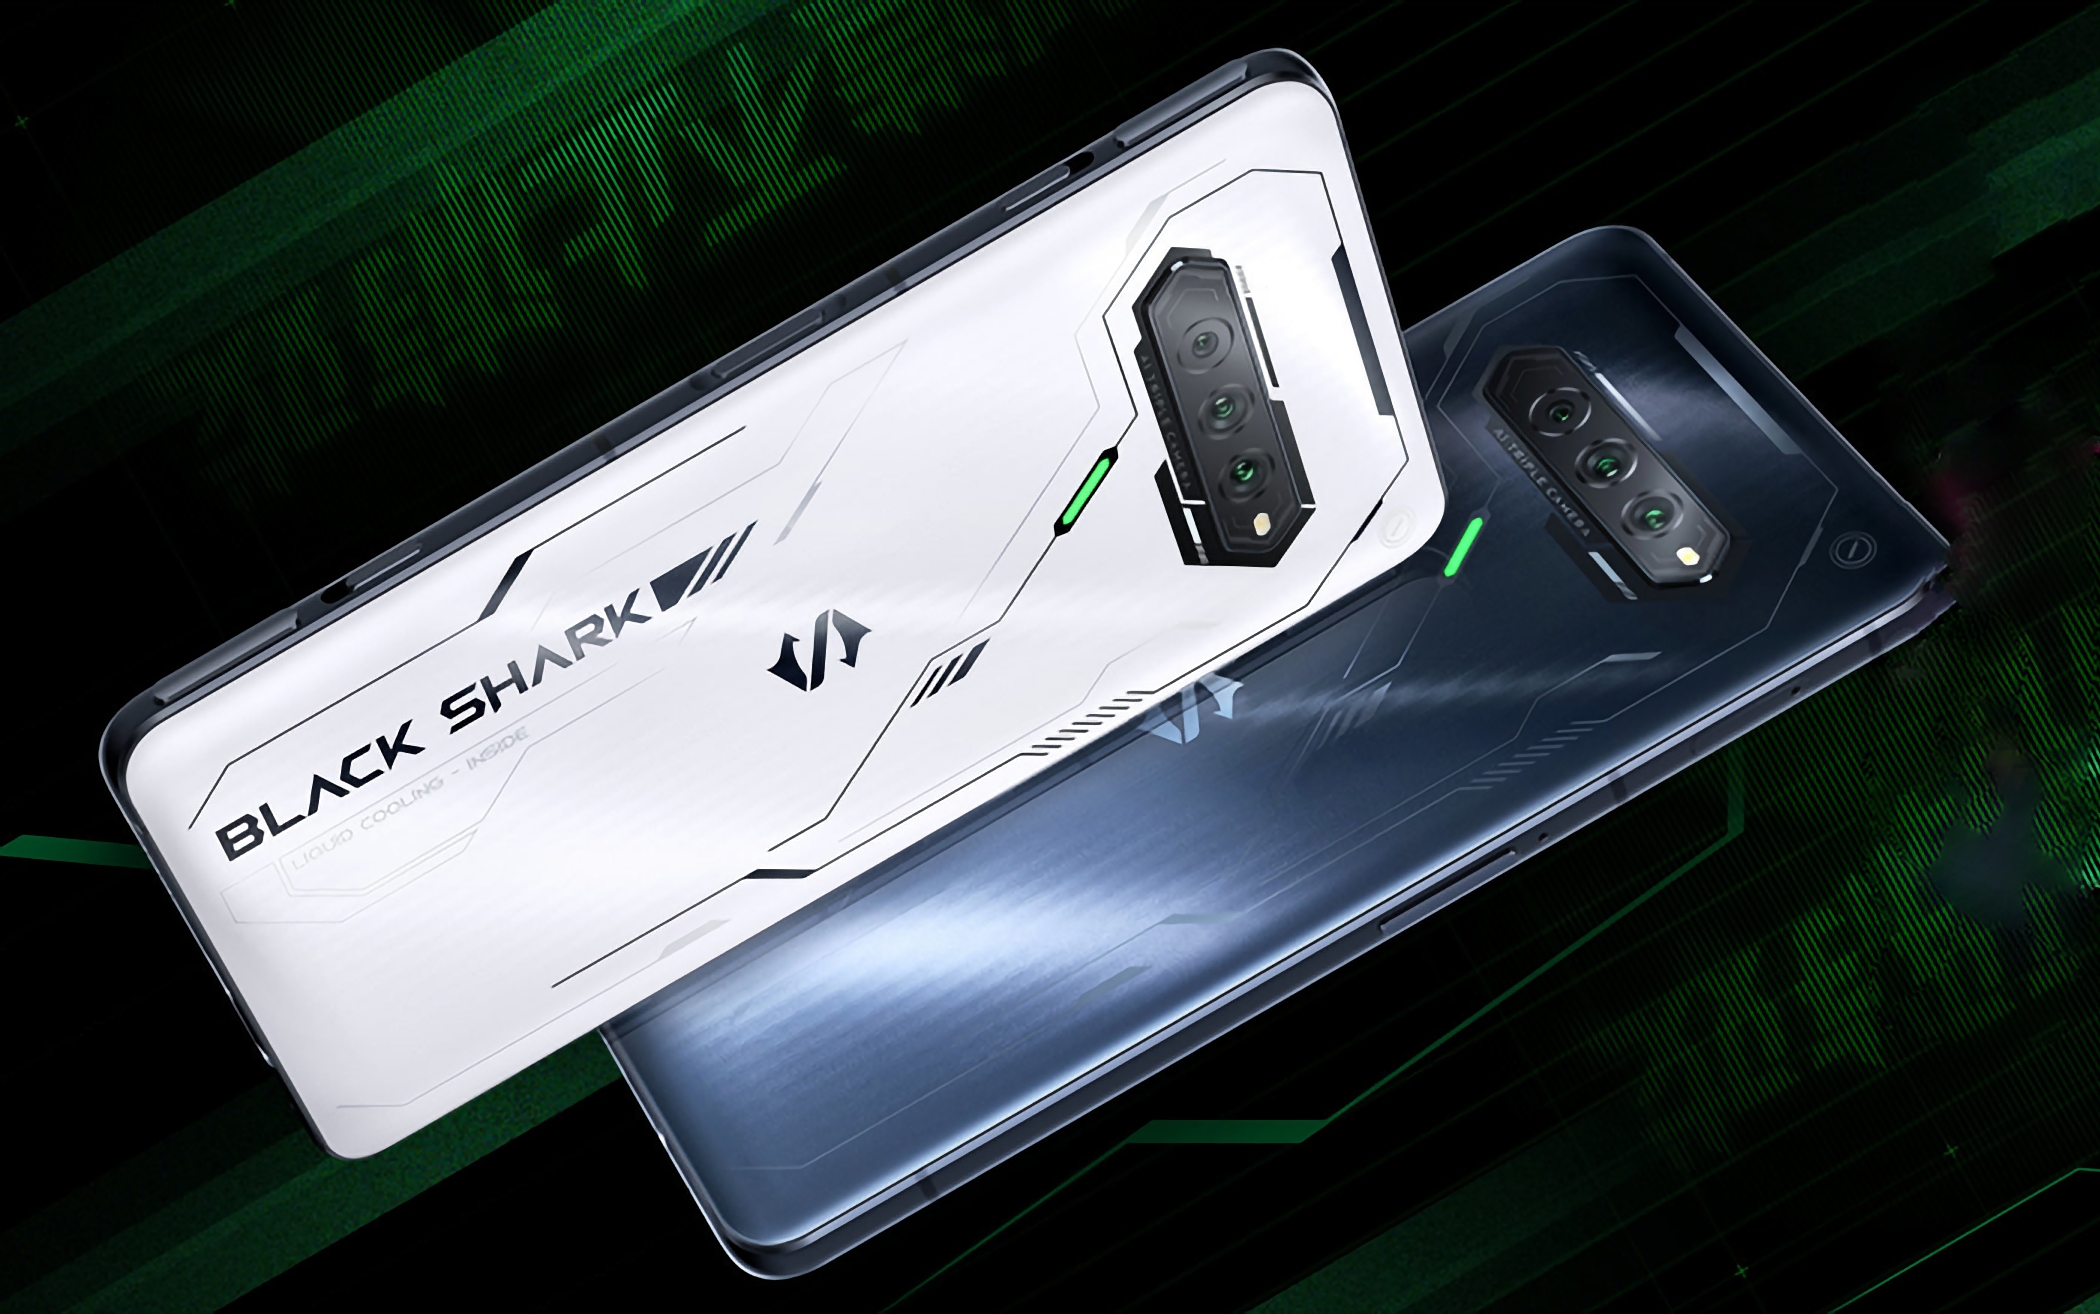 Xiaomi revealed the Black Shark 4S gaming smartphone before the launch